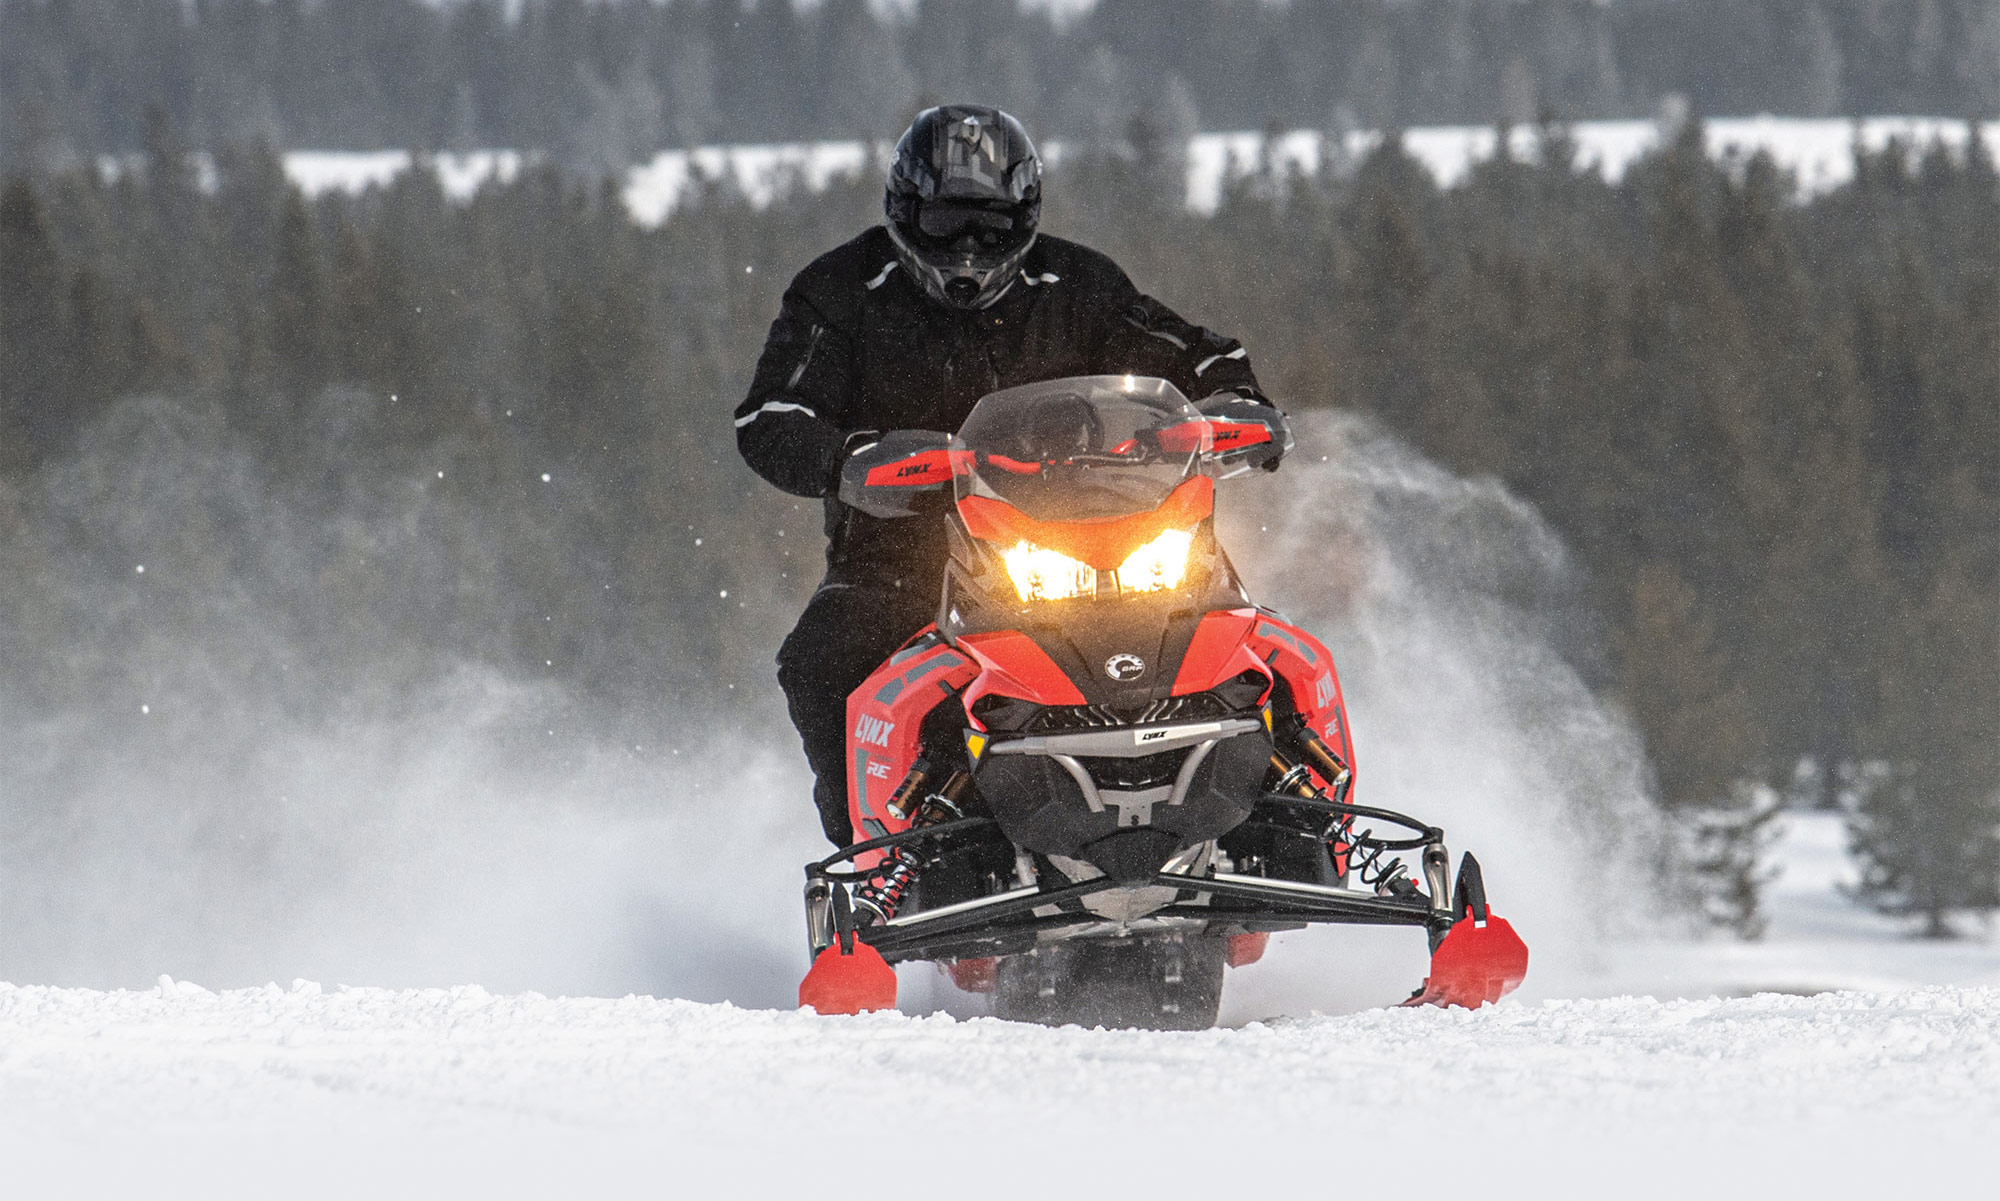 Lynx Xtreme RE snowmobile being ridden in snow